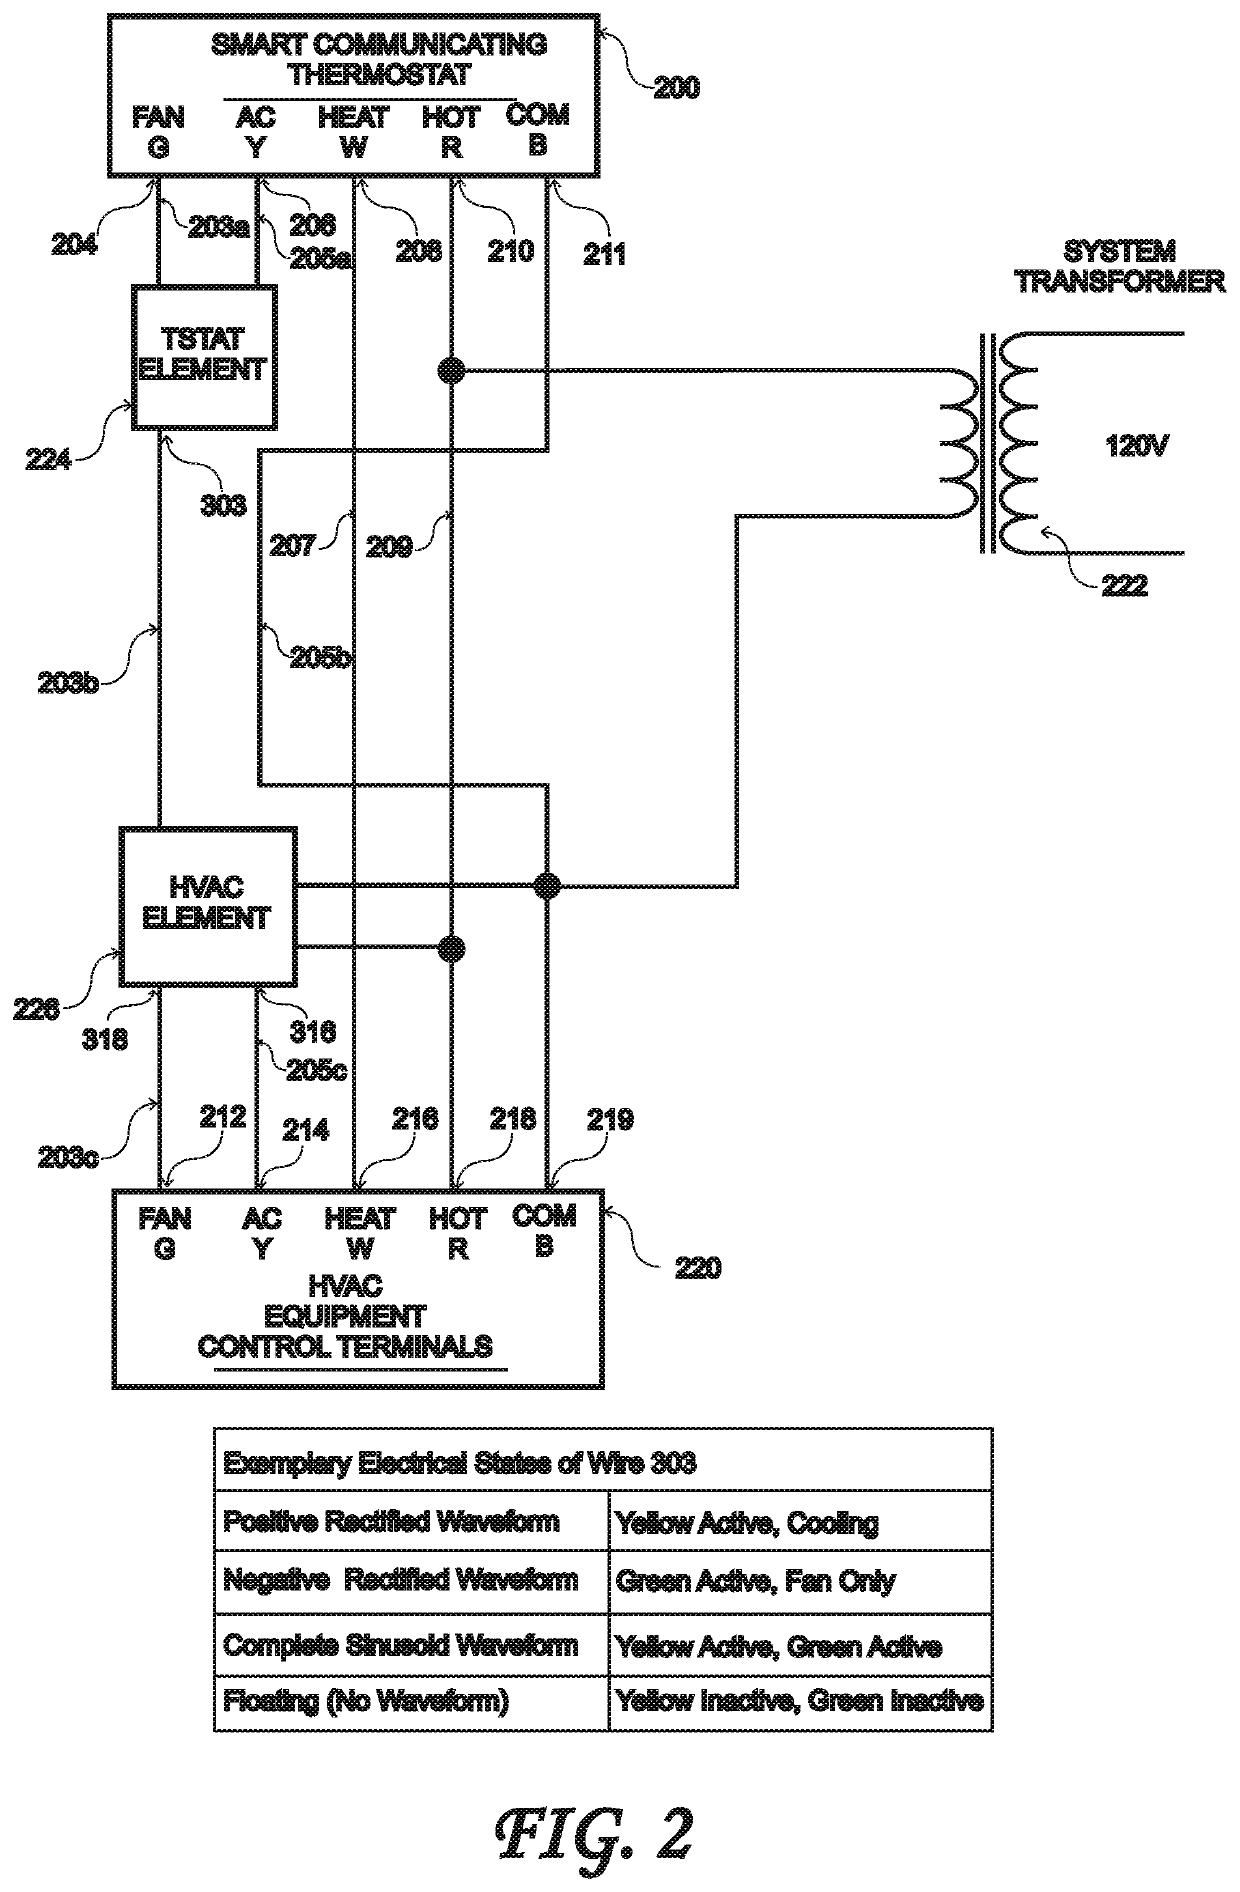 Solid-state Electronic Apparatus to Provide Reliable Electric Power for Smart Communicating Thermostats